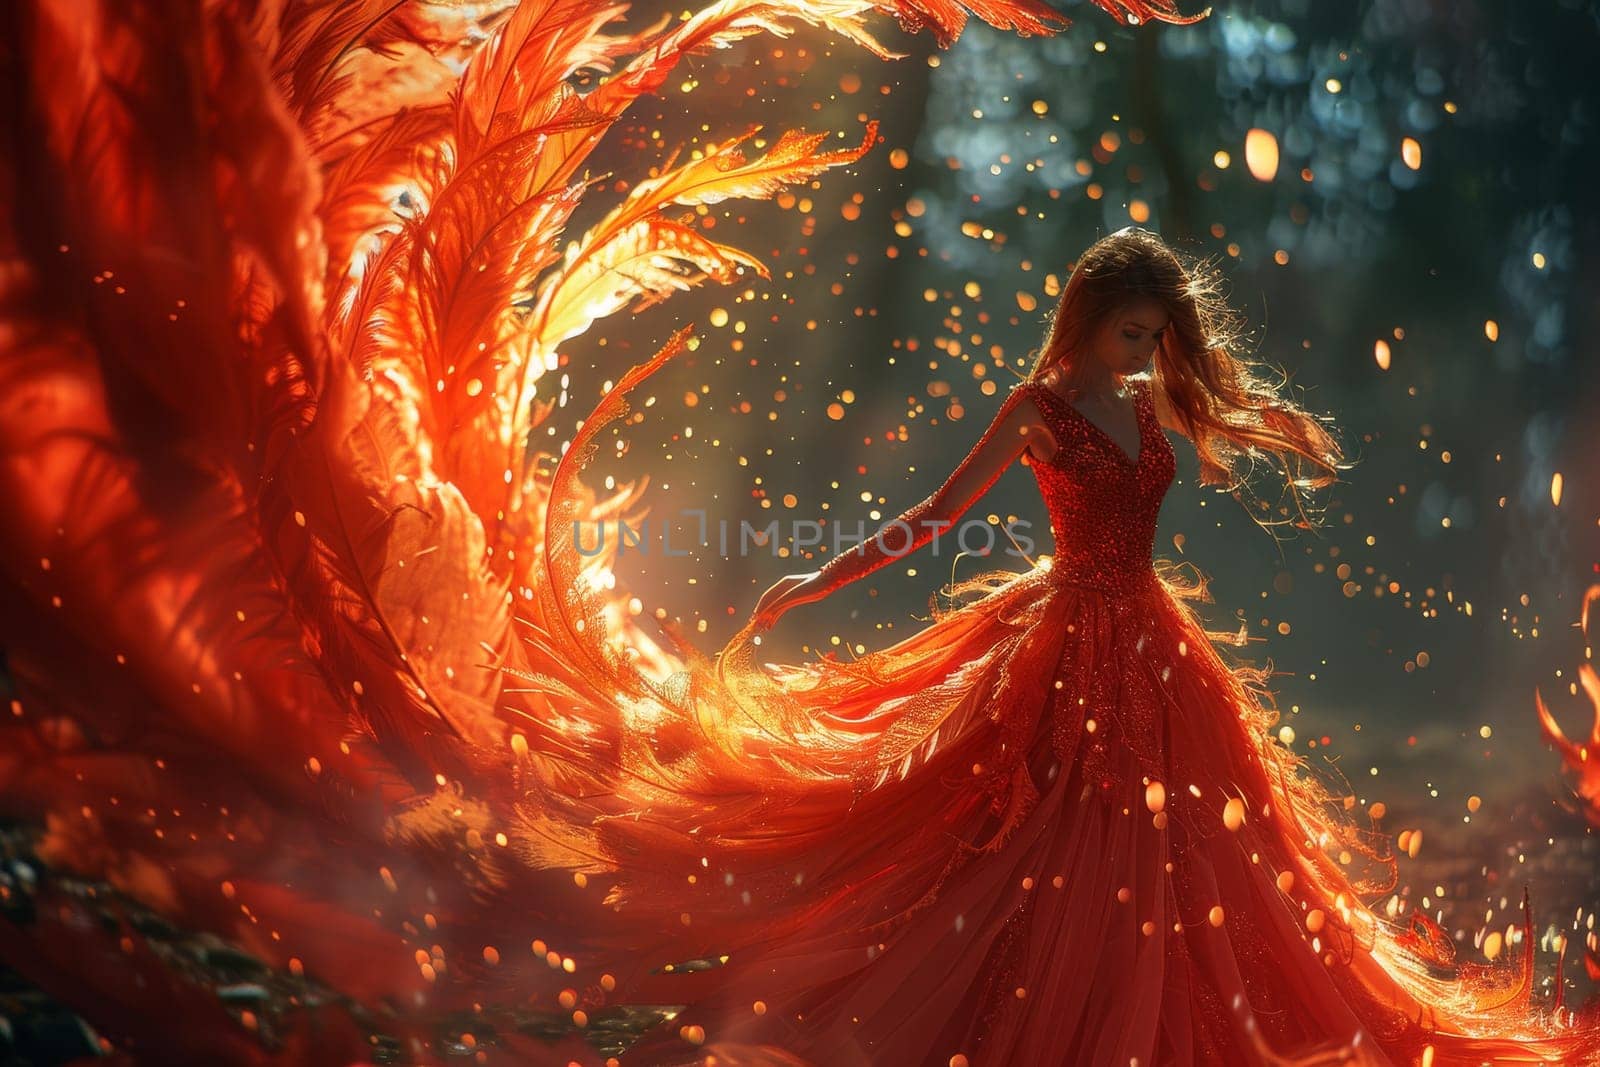 A woman with a fiery winged angelic appearance